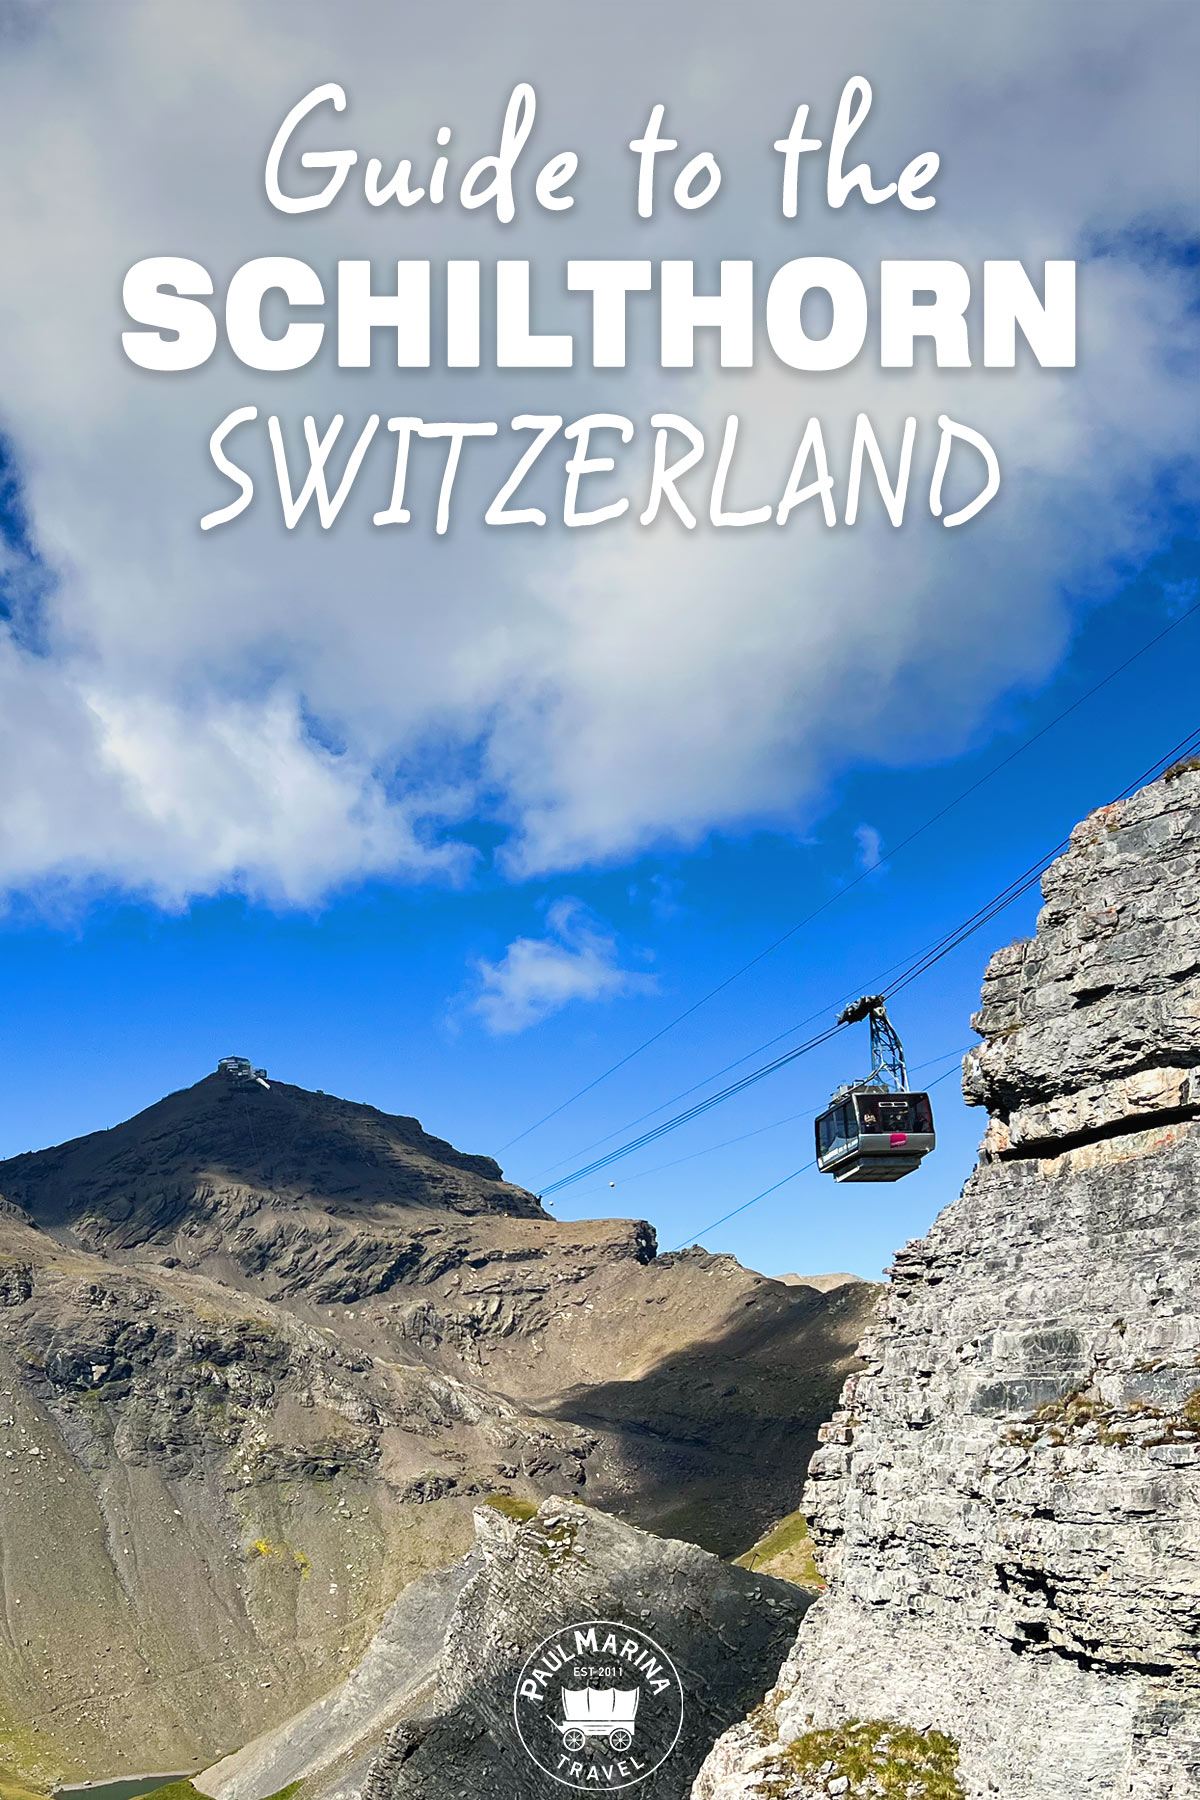 Guide to the Schilthorn Switzerland pin image